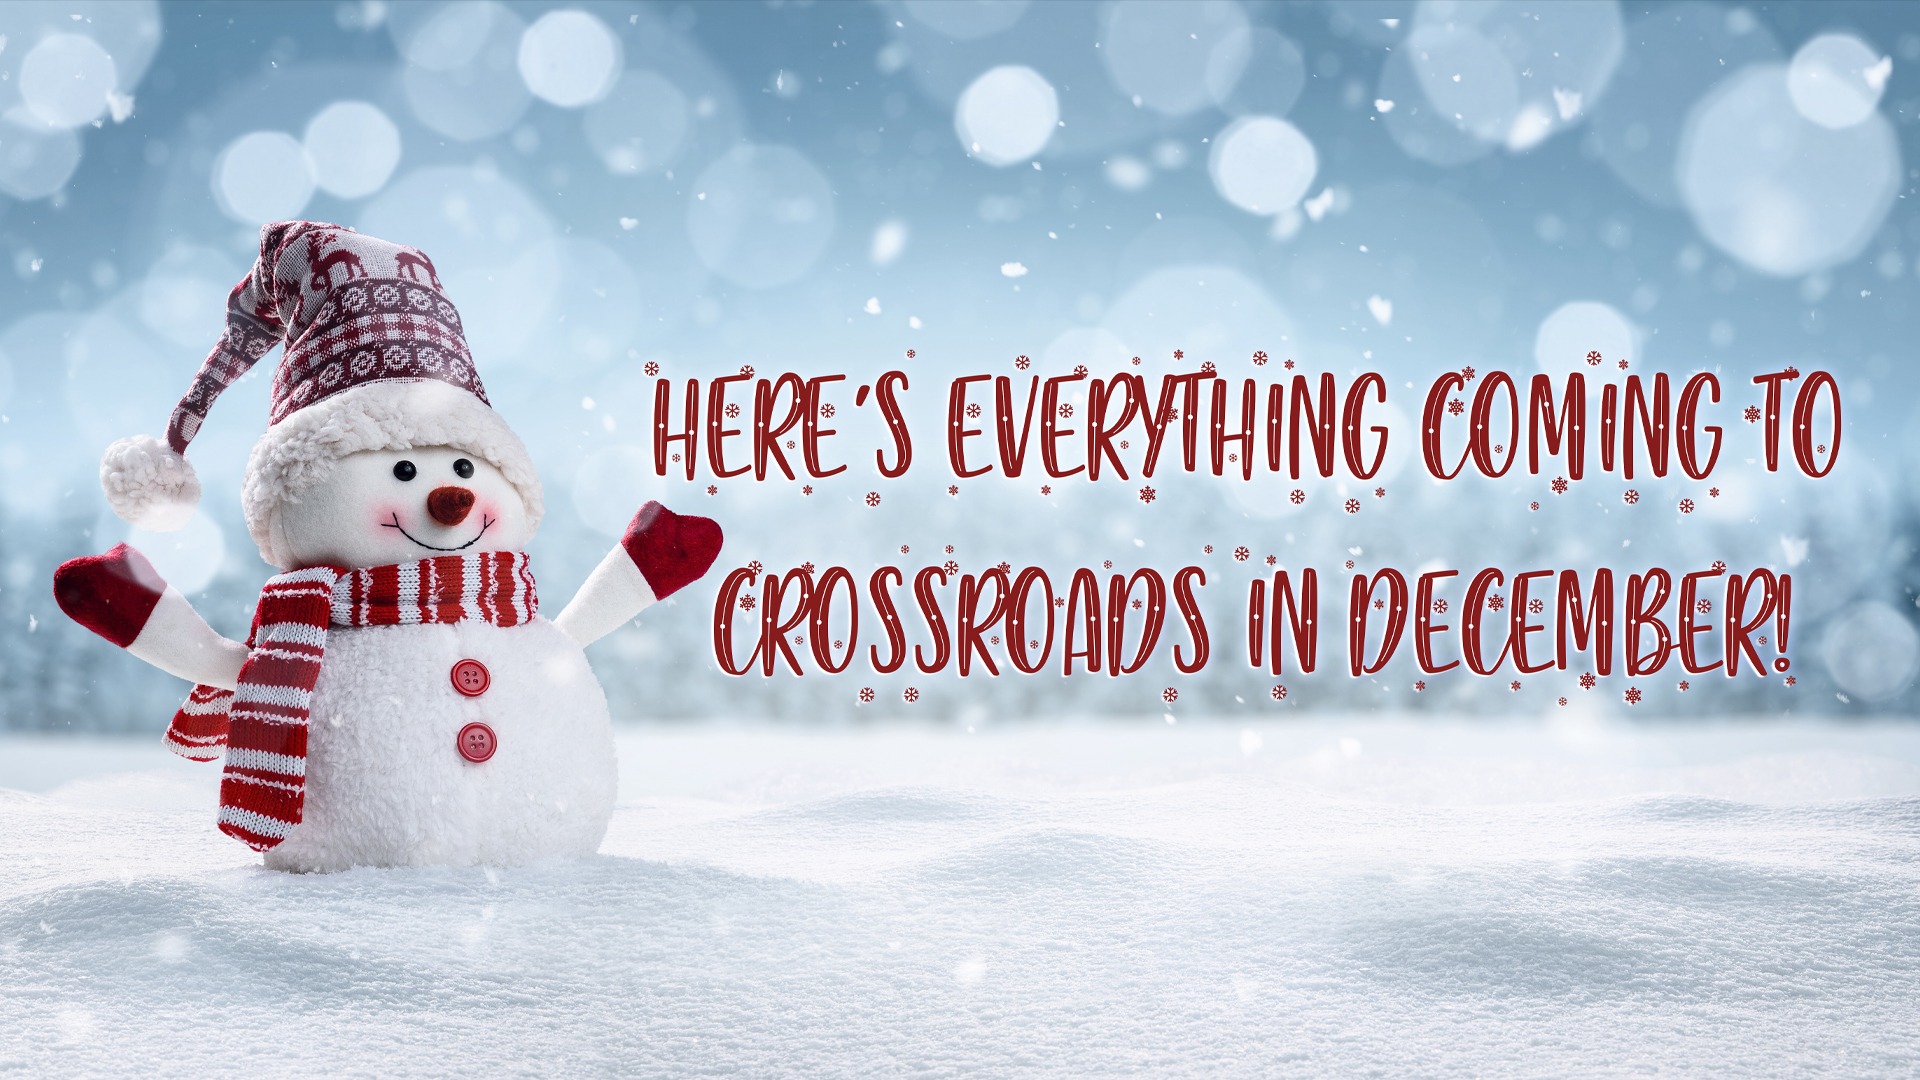 Here’s Everything Coming to Crossroads in December